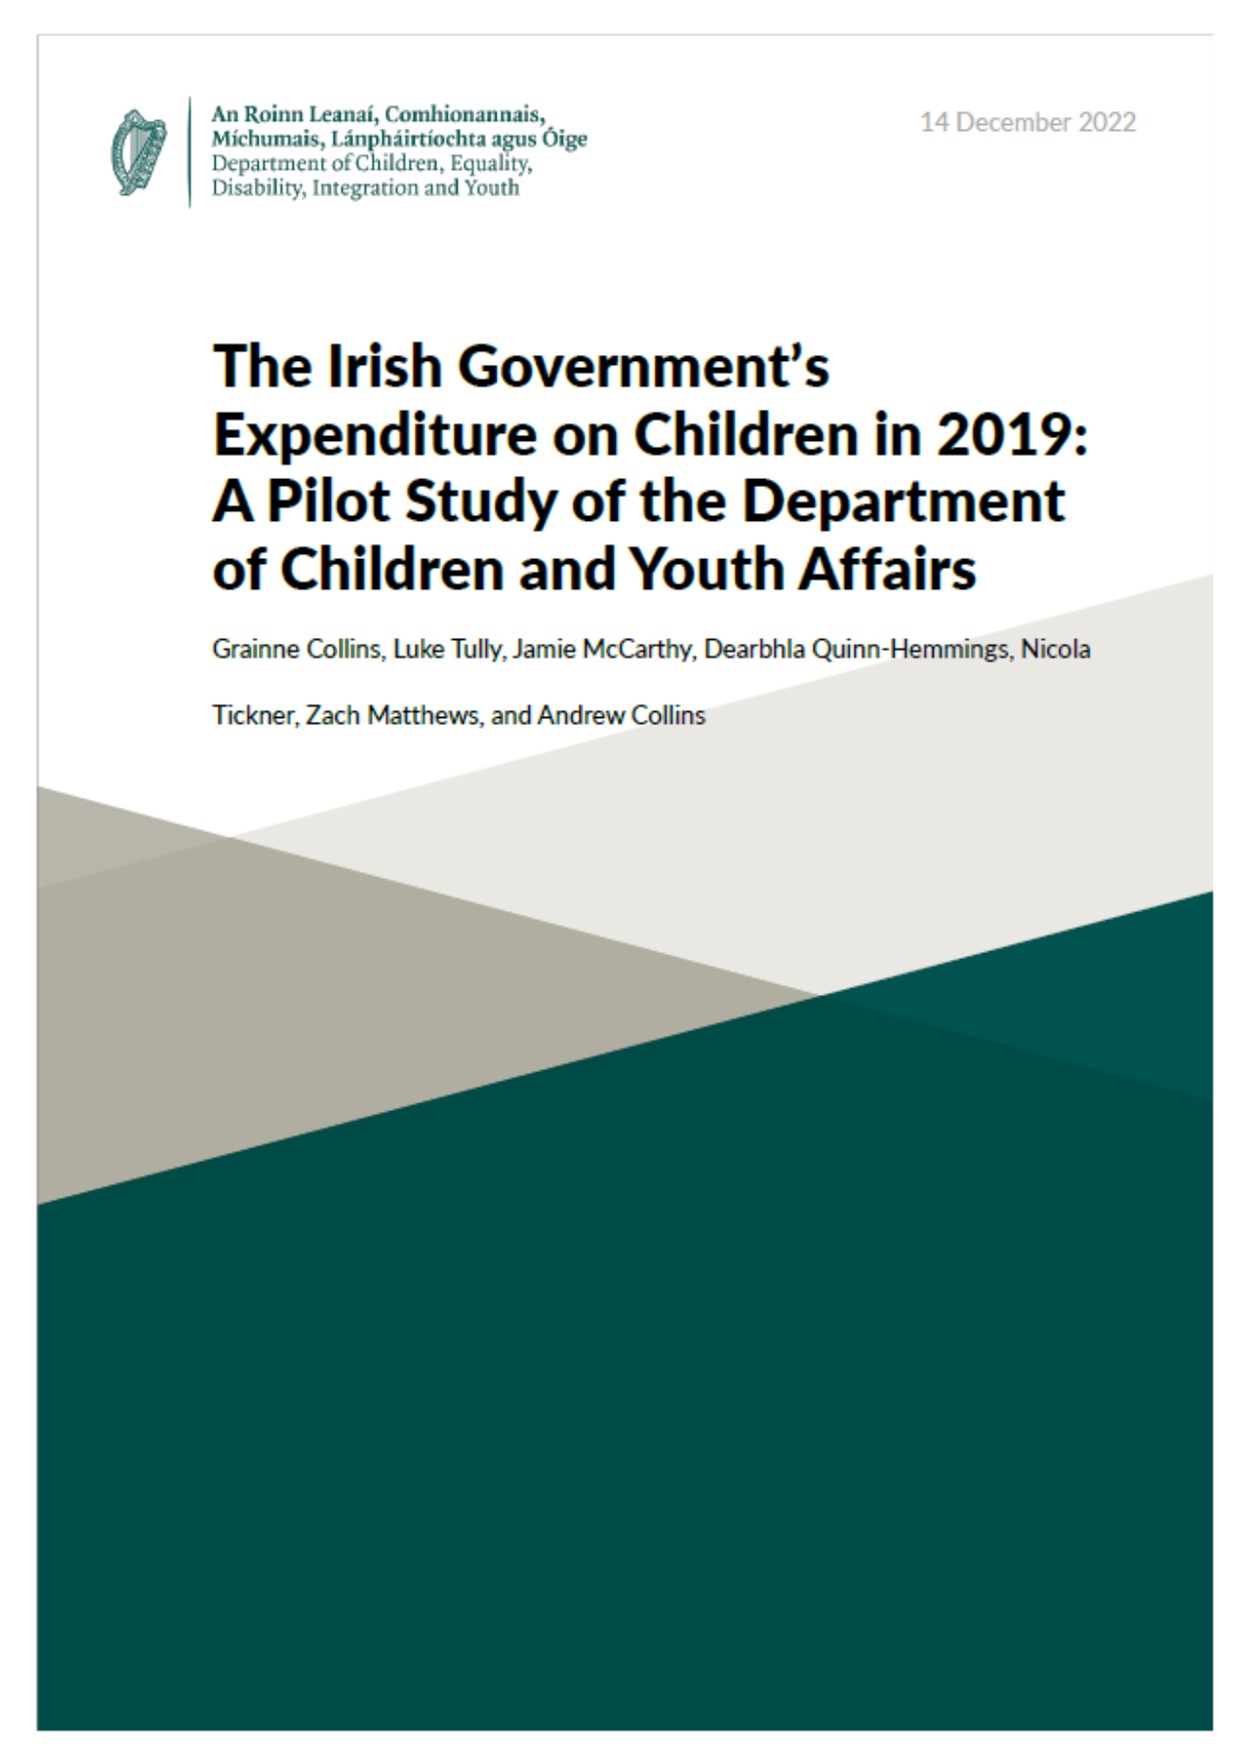 The Irish Governments Expenditure on Children in 2019 A Pilot Study of the Department of Children and Youth Affairs